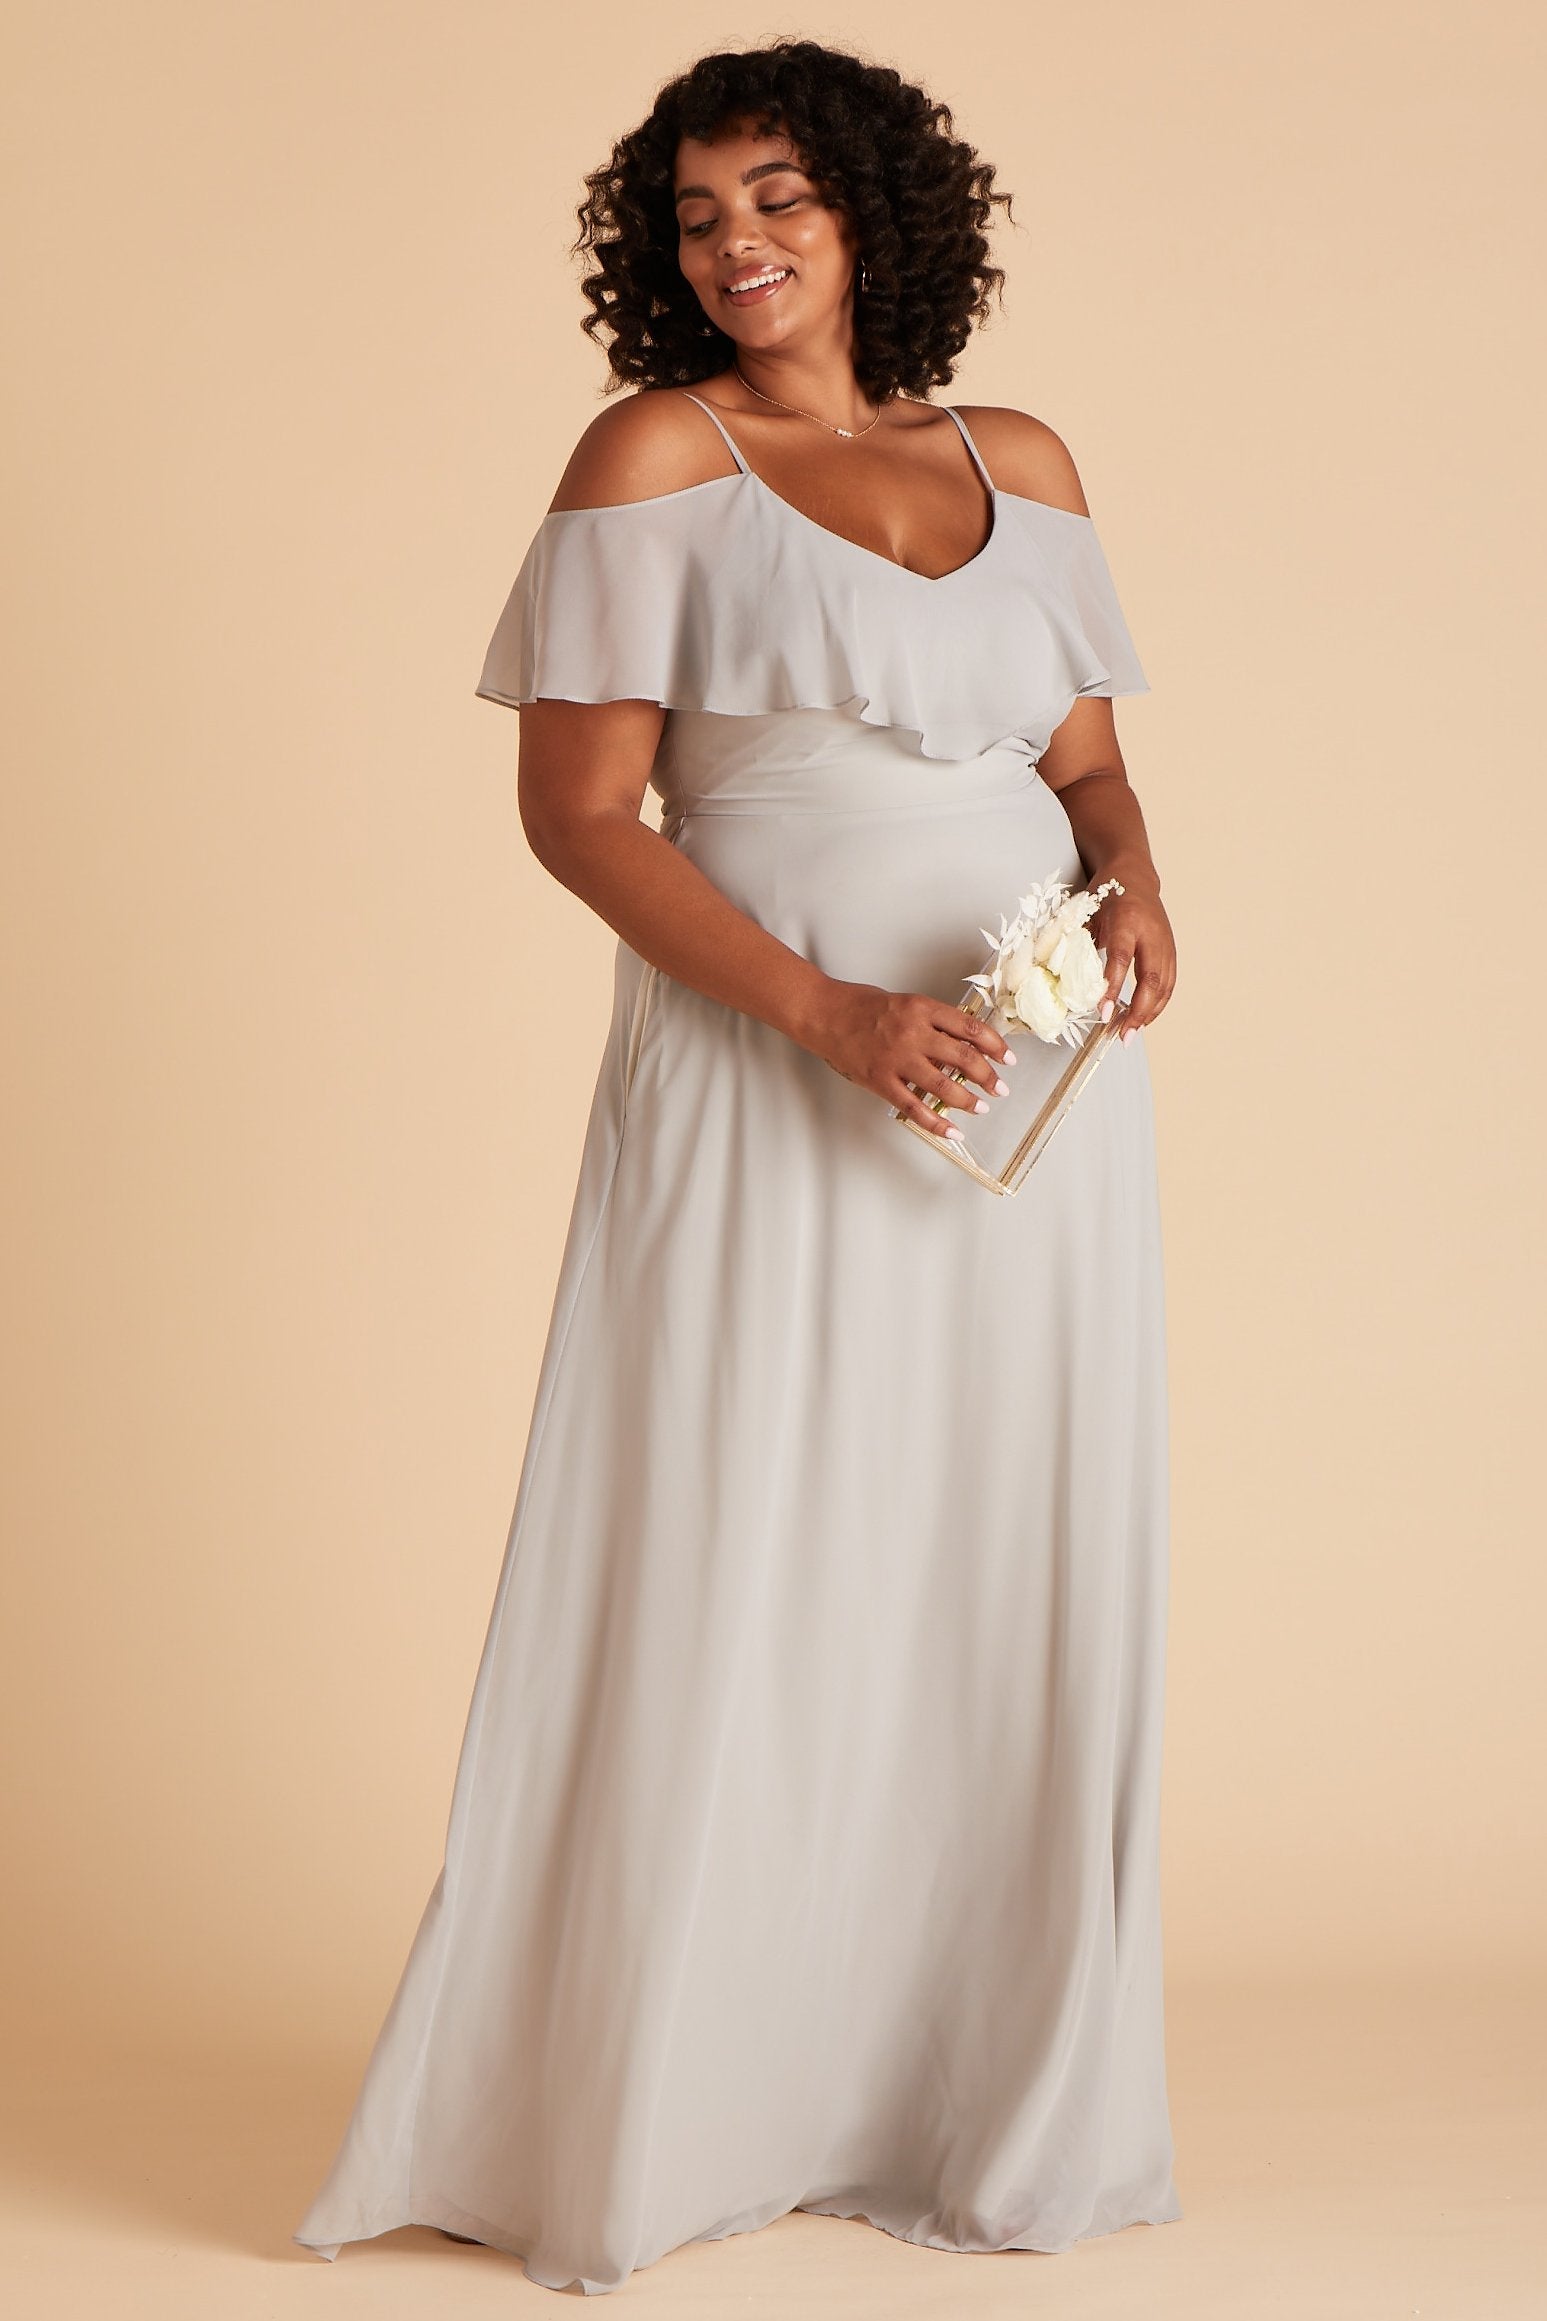 Jane convertible plus size bridesmaid dress in dove gray chiffon by Birdy Grey, side view